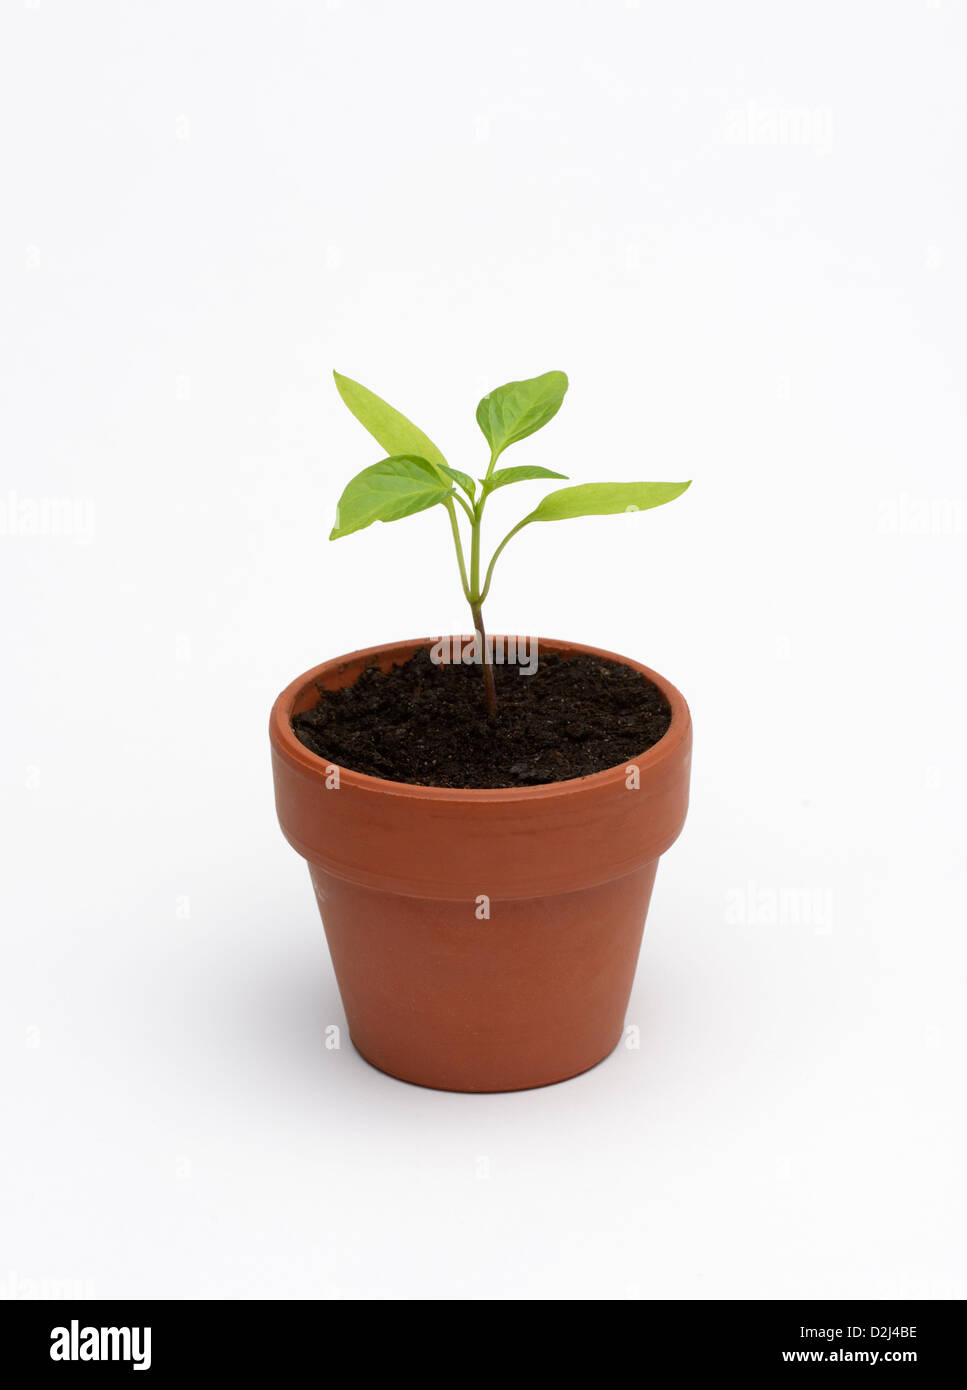 Seedling of a bell pepper plant, Capsicum annuum Stock Photo